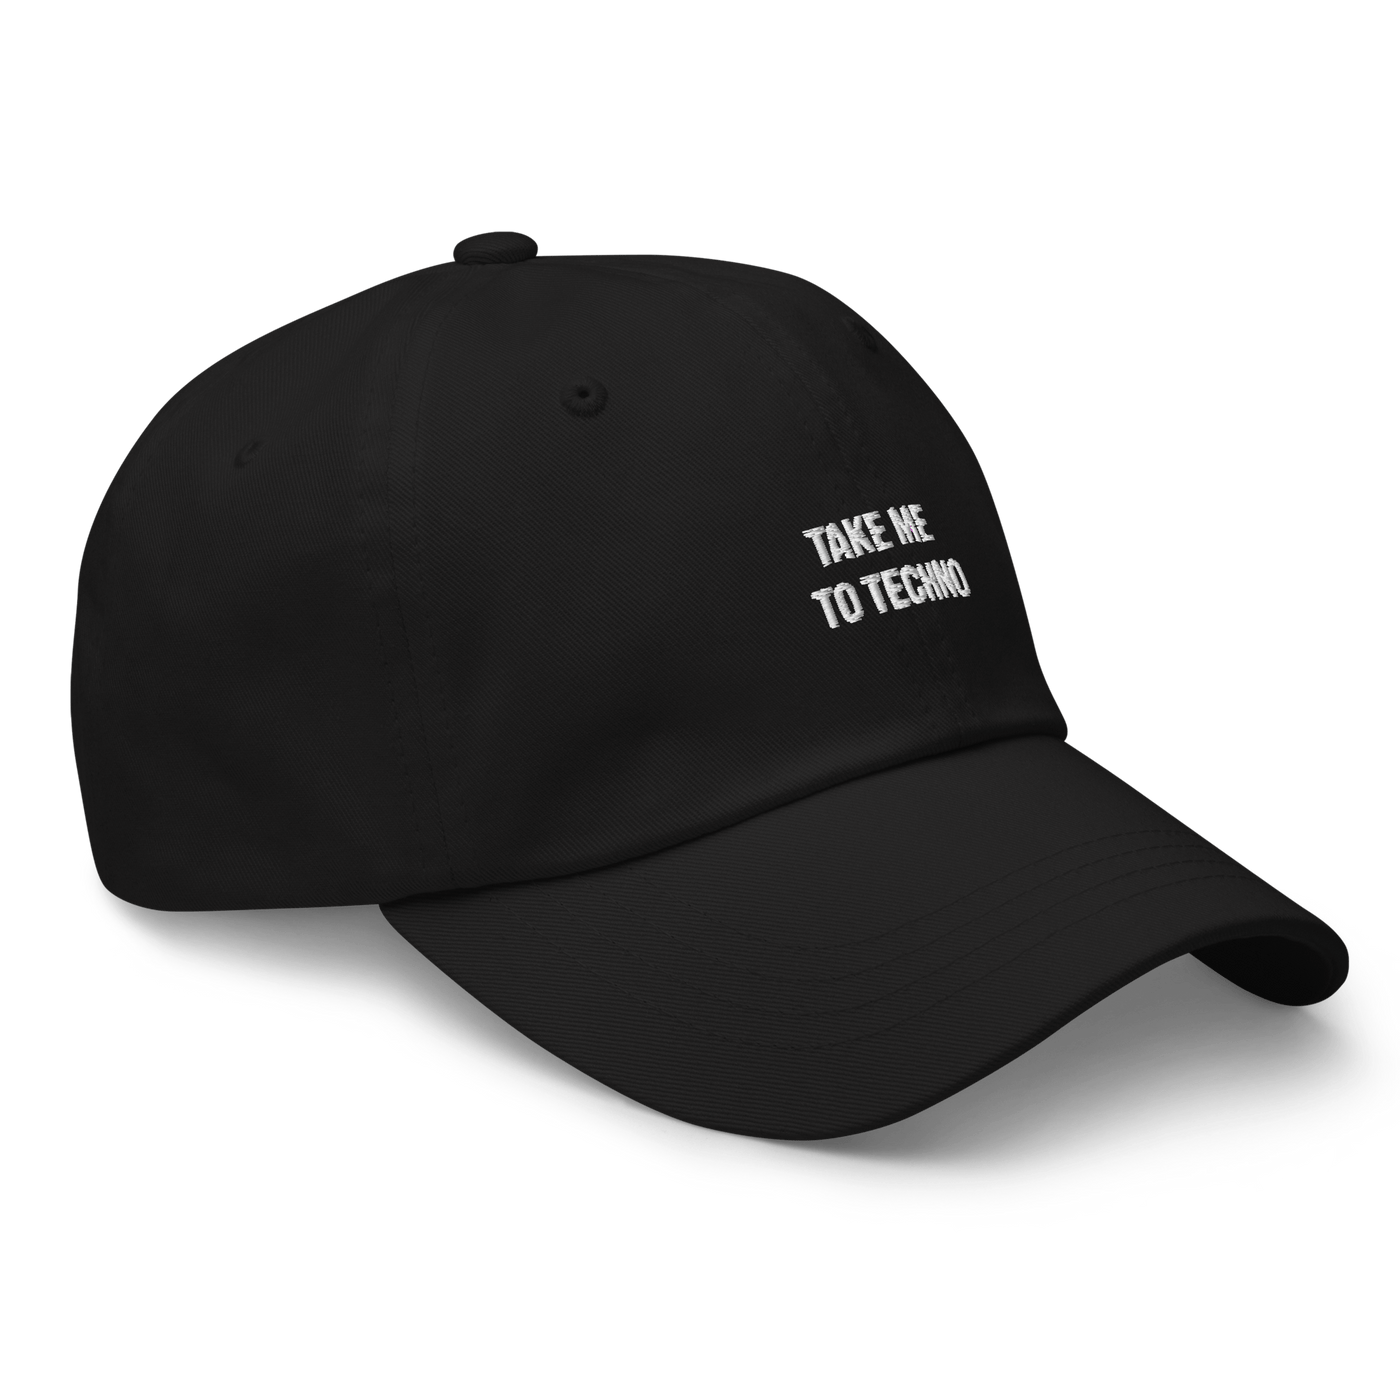 Take me to techno Dad Hat - Black - - Just Another Cap Store